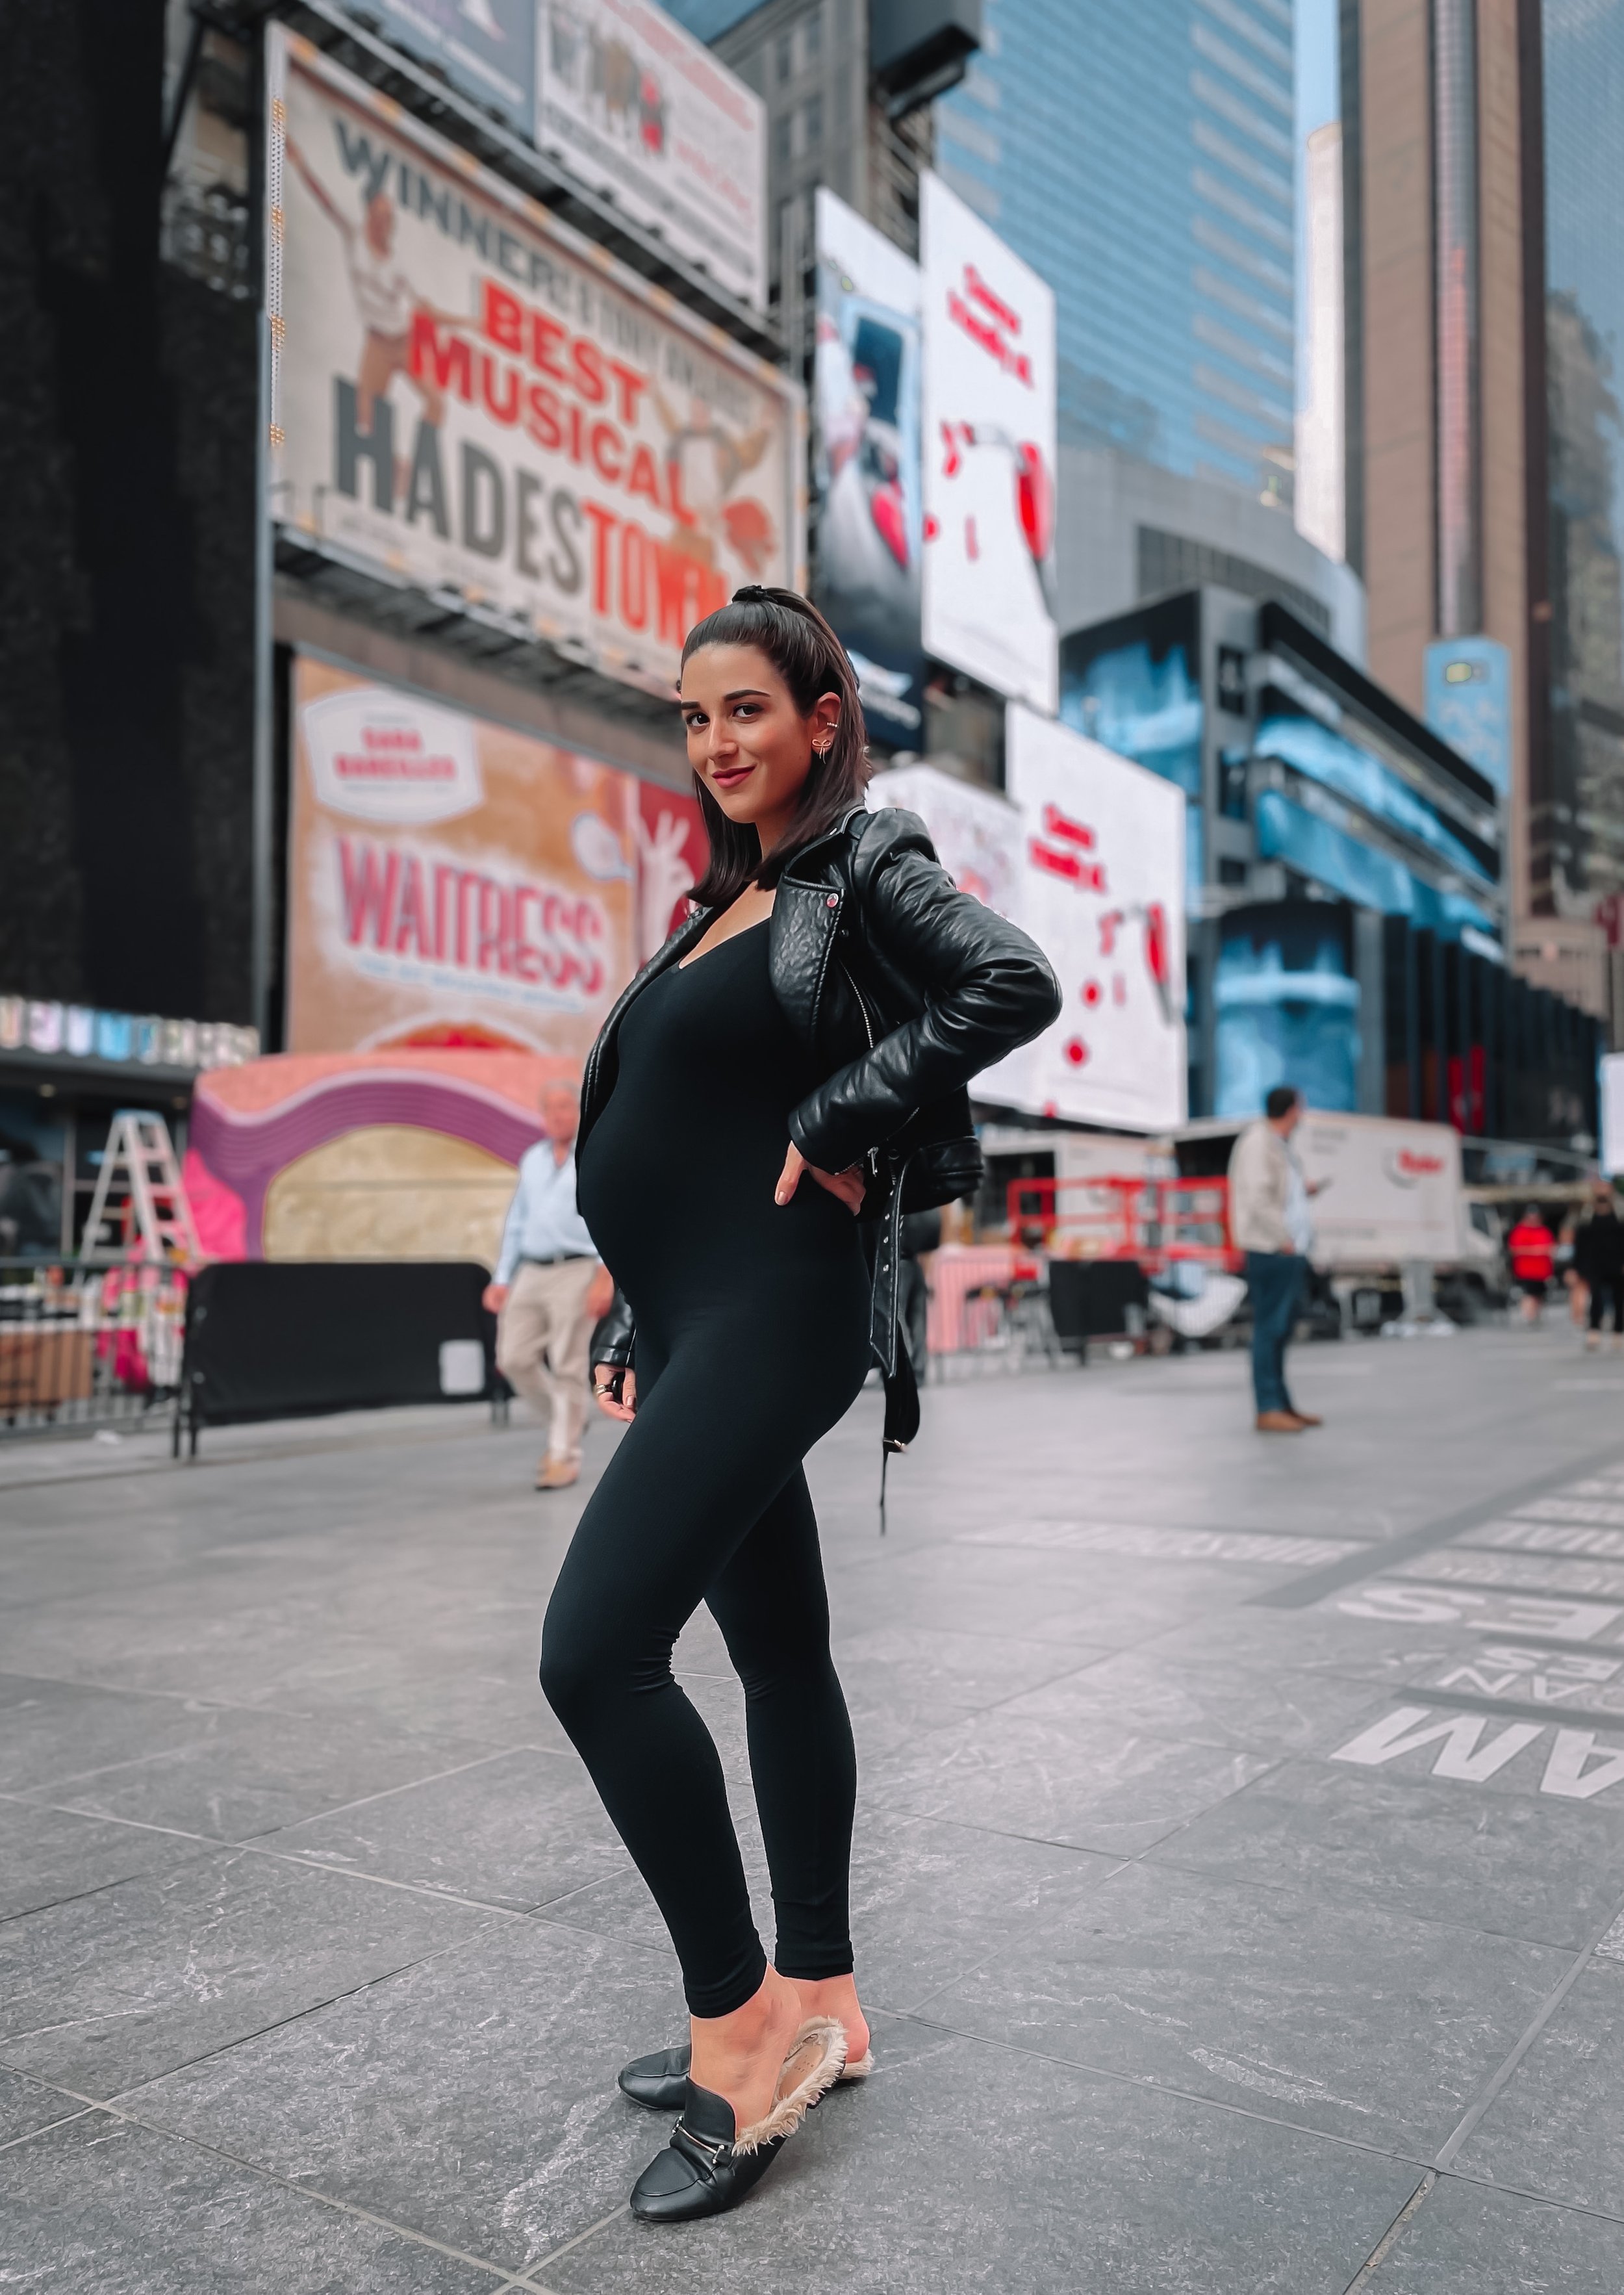 Ribbed Black Jumpsuit Leather Jacket Esther Santer NYC Street Style Blogger Pregnancy Style Maternity Fashion Bump Styled Bumpdate Hatch Unitard Target Fur Slides Expecting Mom What To Wear Shopping All Black Outfit OOTD Times Square NYC Tripod Photo.JPG